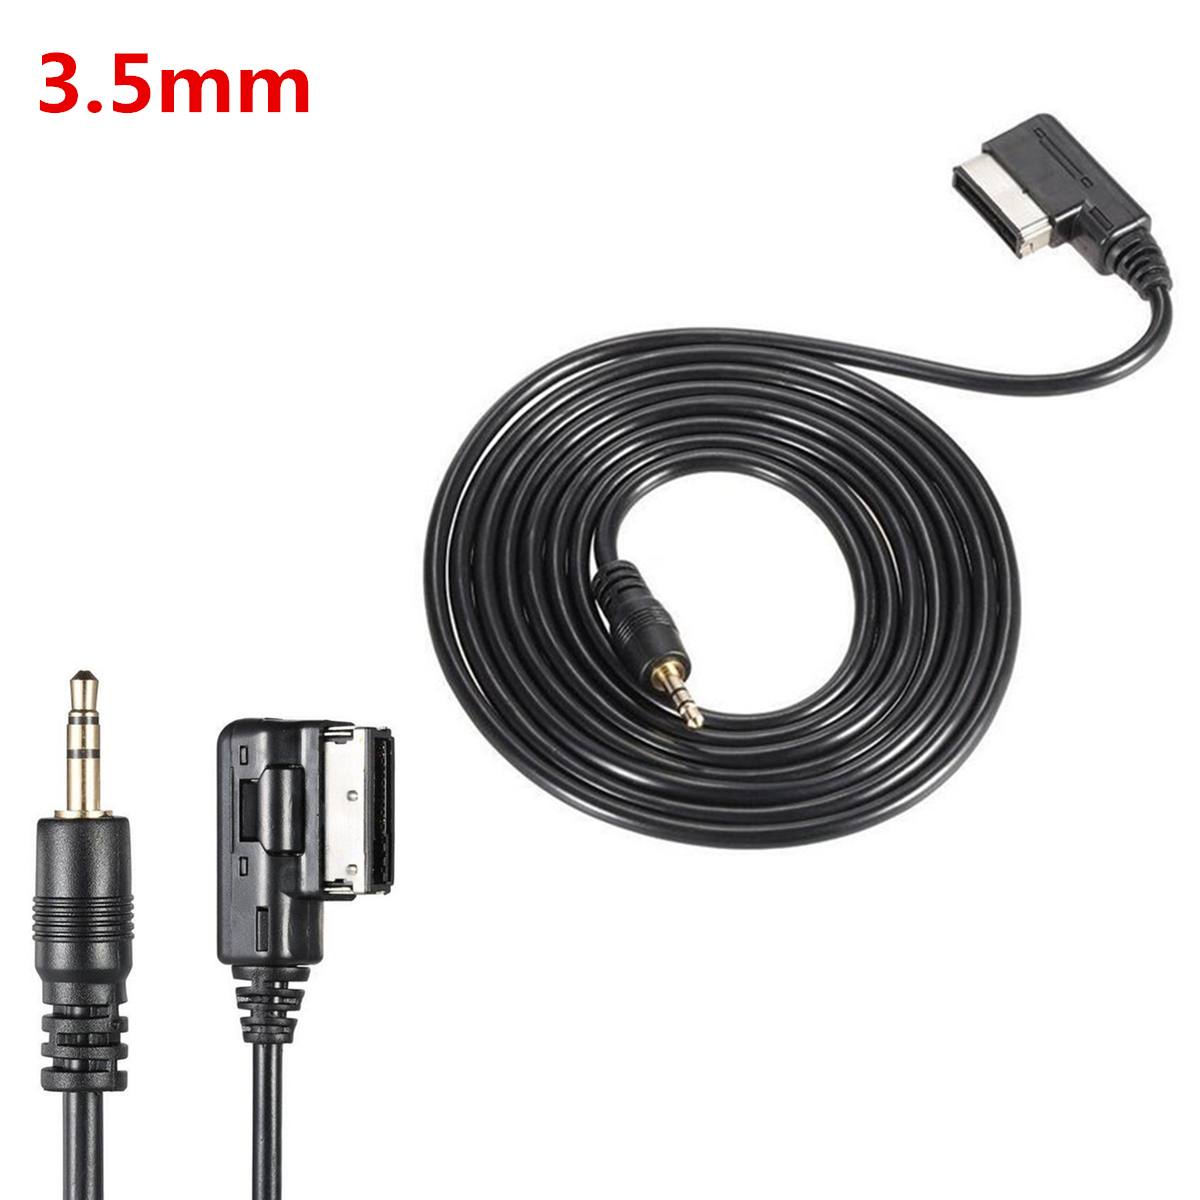 110cm-Long-Audio-Music-Interface-Adapter-Cable-Cord-35MM-AUX-AMI-MMI-For-iphone-Samsung-Xiaomi-1235482